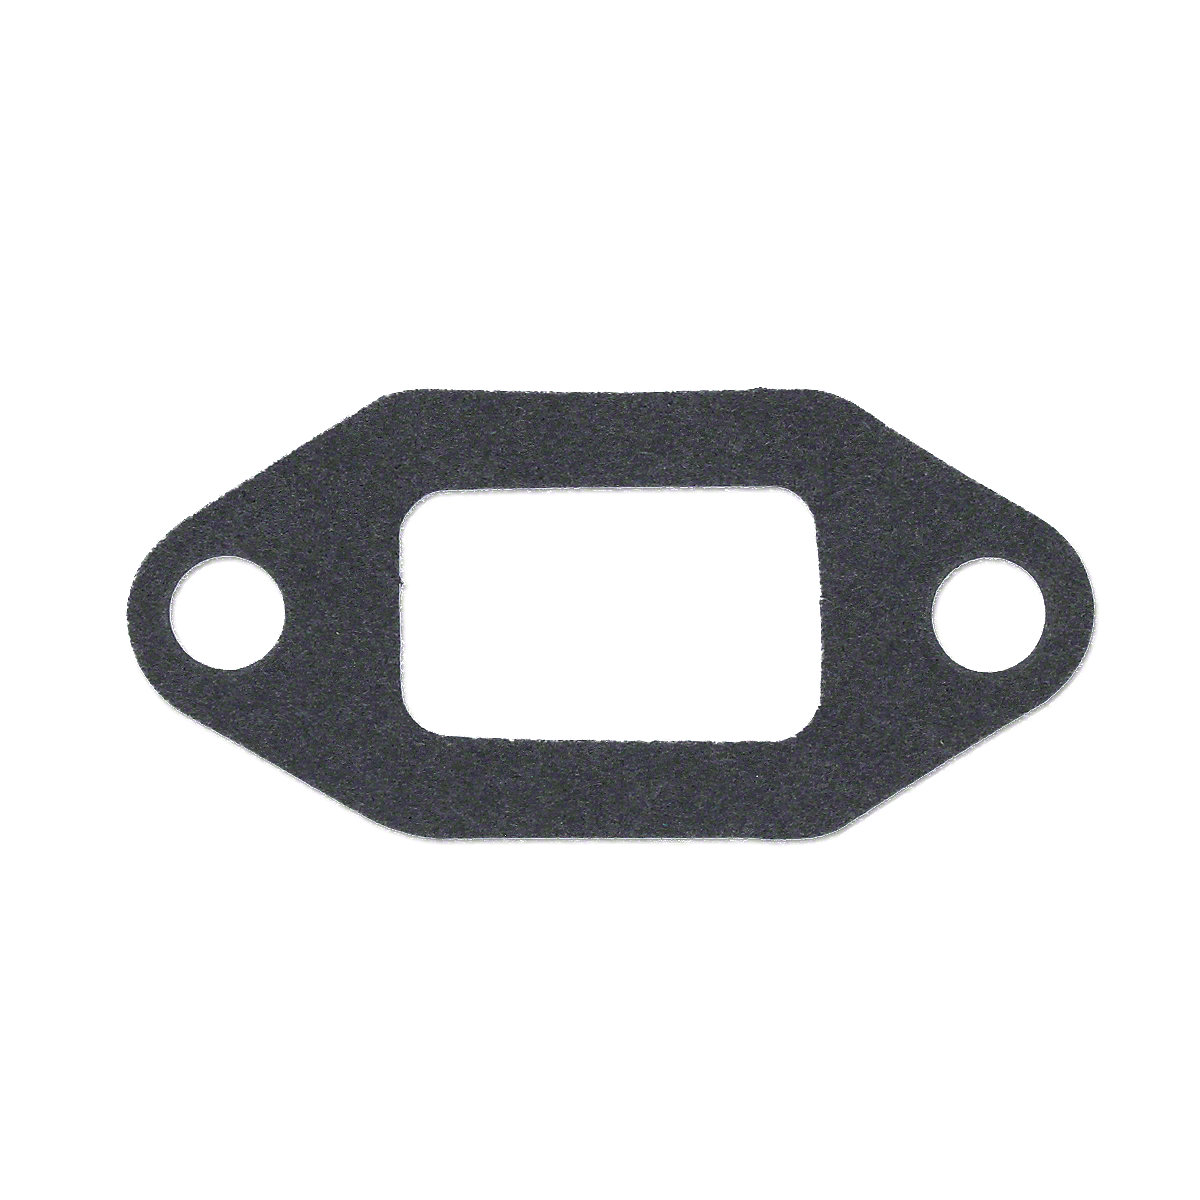 Upper Water Outlet Elbow Gasket For Massey Ferguson: TE20, TO20, TO30, TO35, 135, 150, 202, 204, 230, 235, 245, 2135, 2200, 2500, 4500, 35, 50, 40, Massey Harris: 50